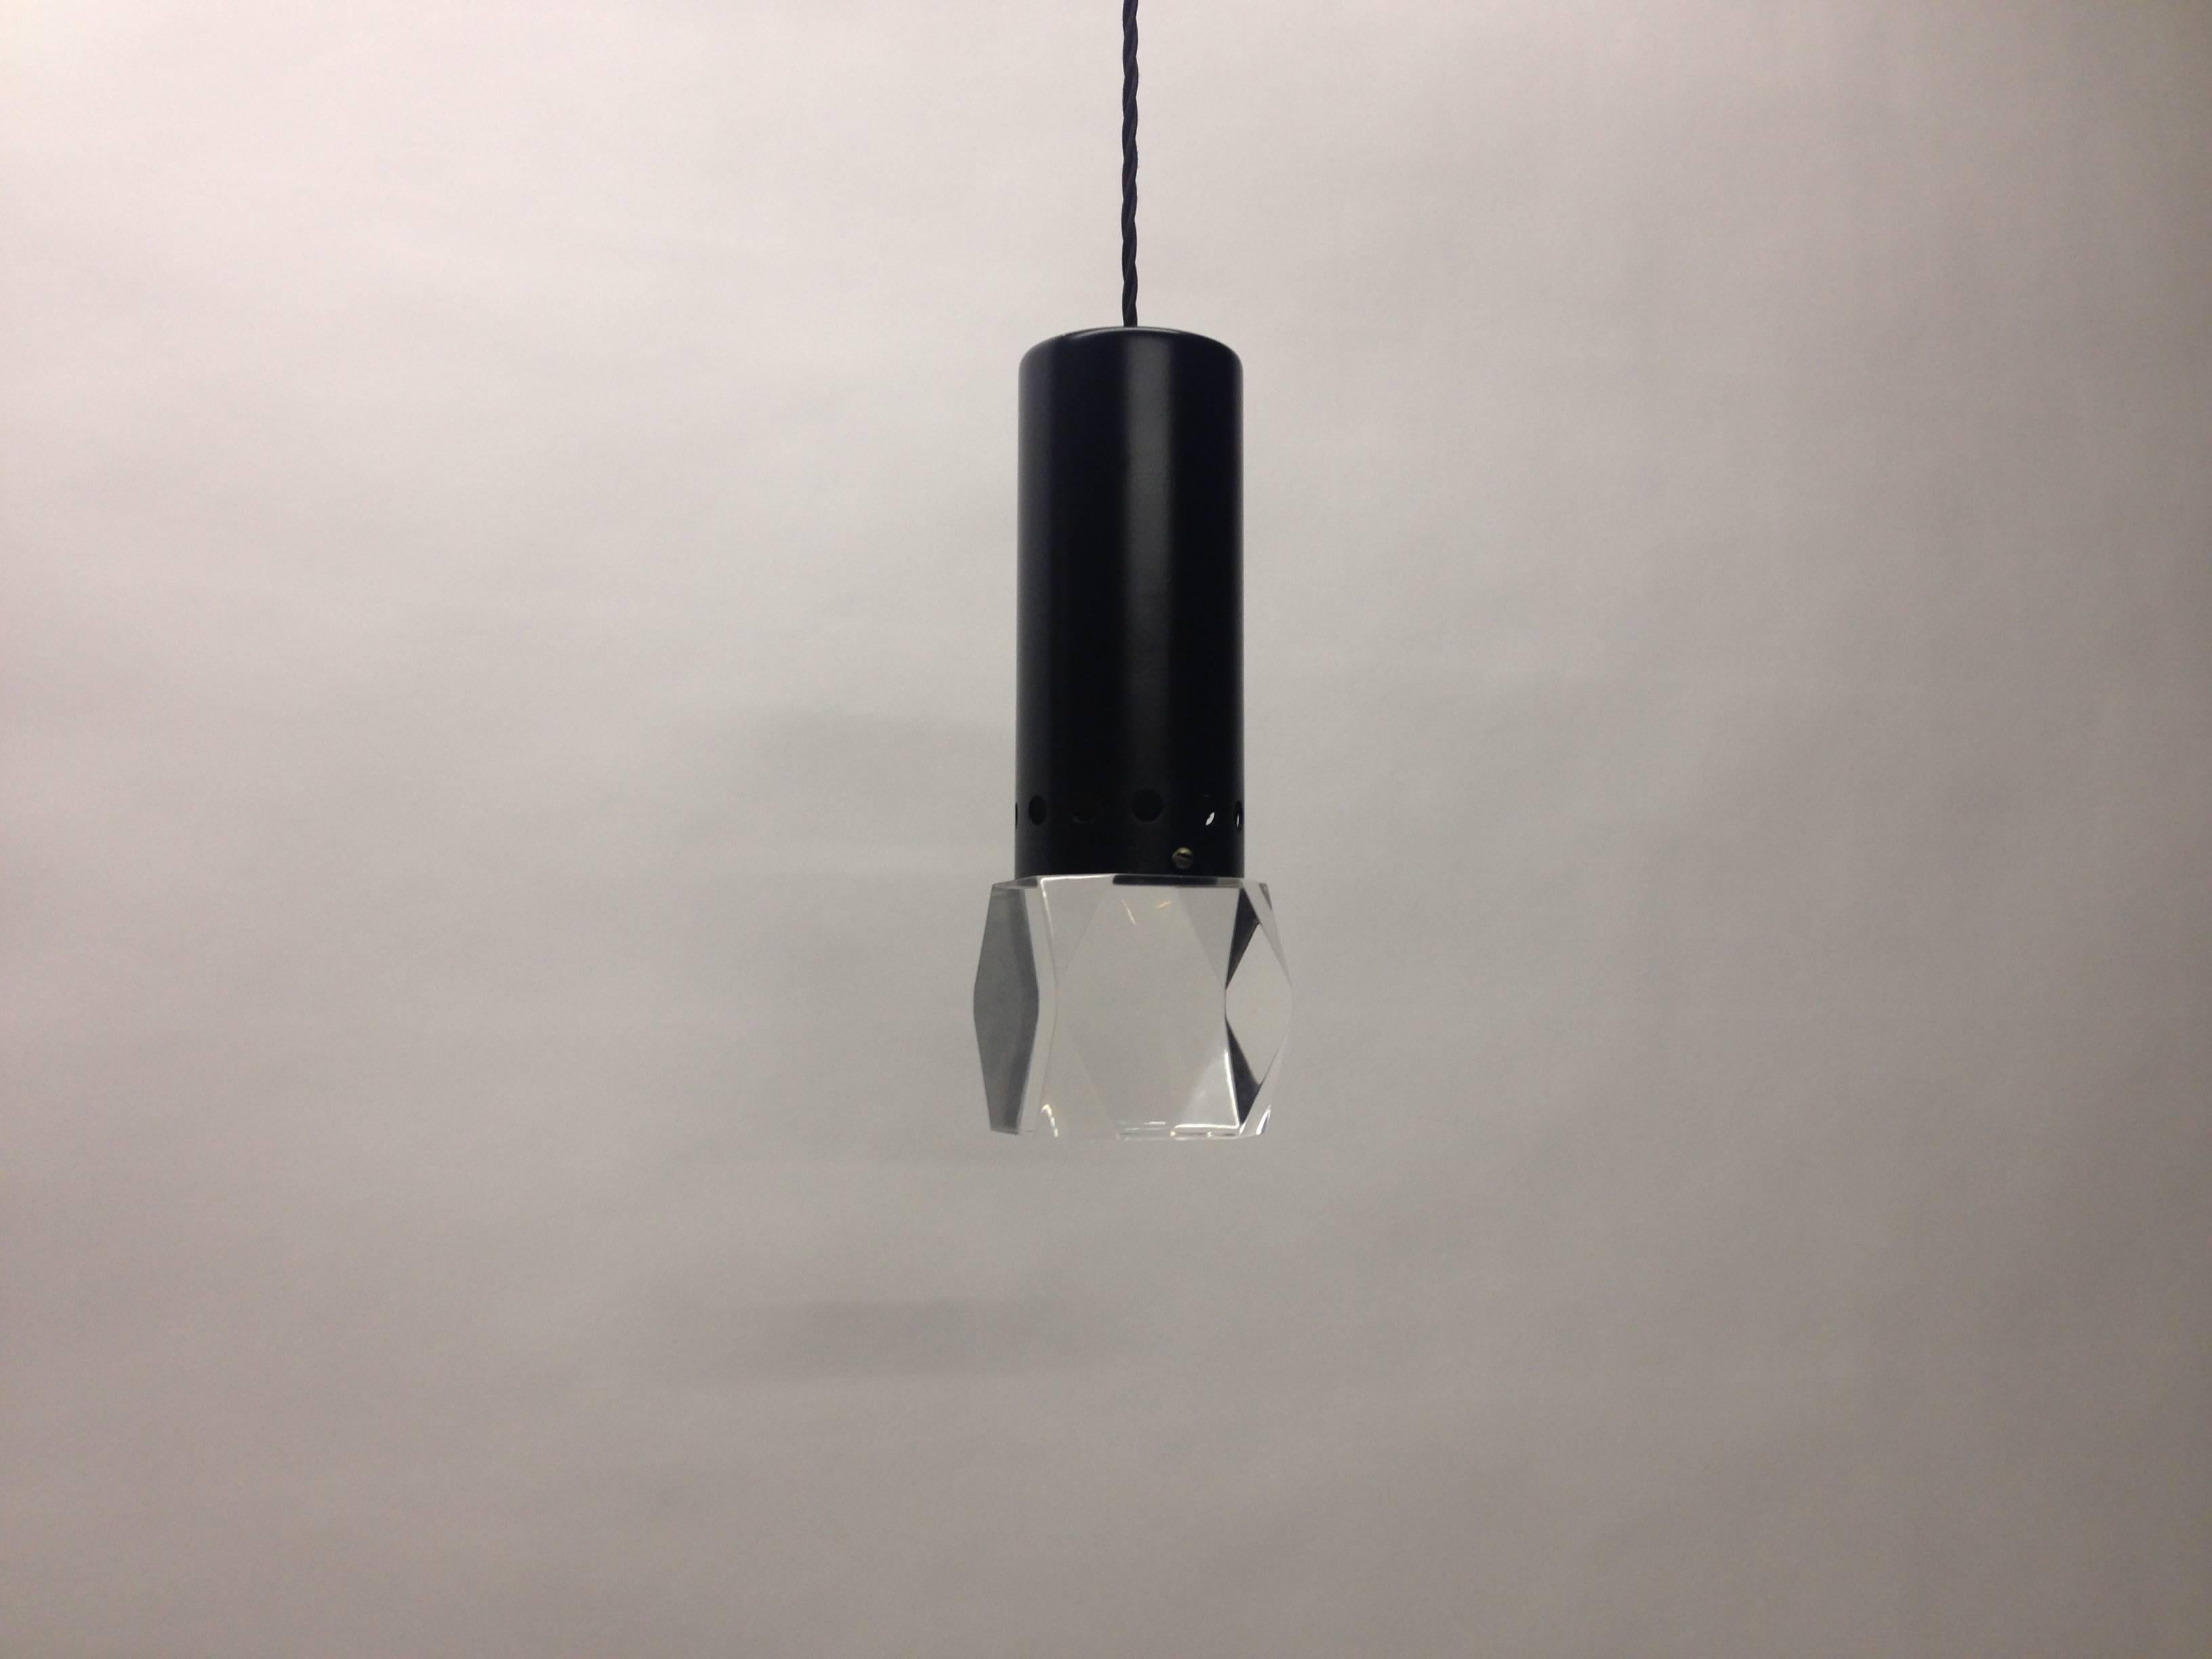 Pair of Acrylic and Perforated Metal Ceiling Lights, USA, circa 1970 In Excellent Condition For Sale In Jersey City, NJ